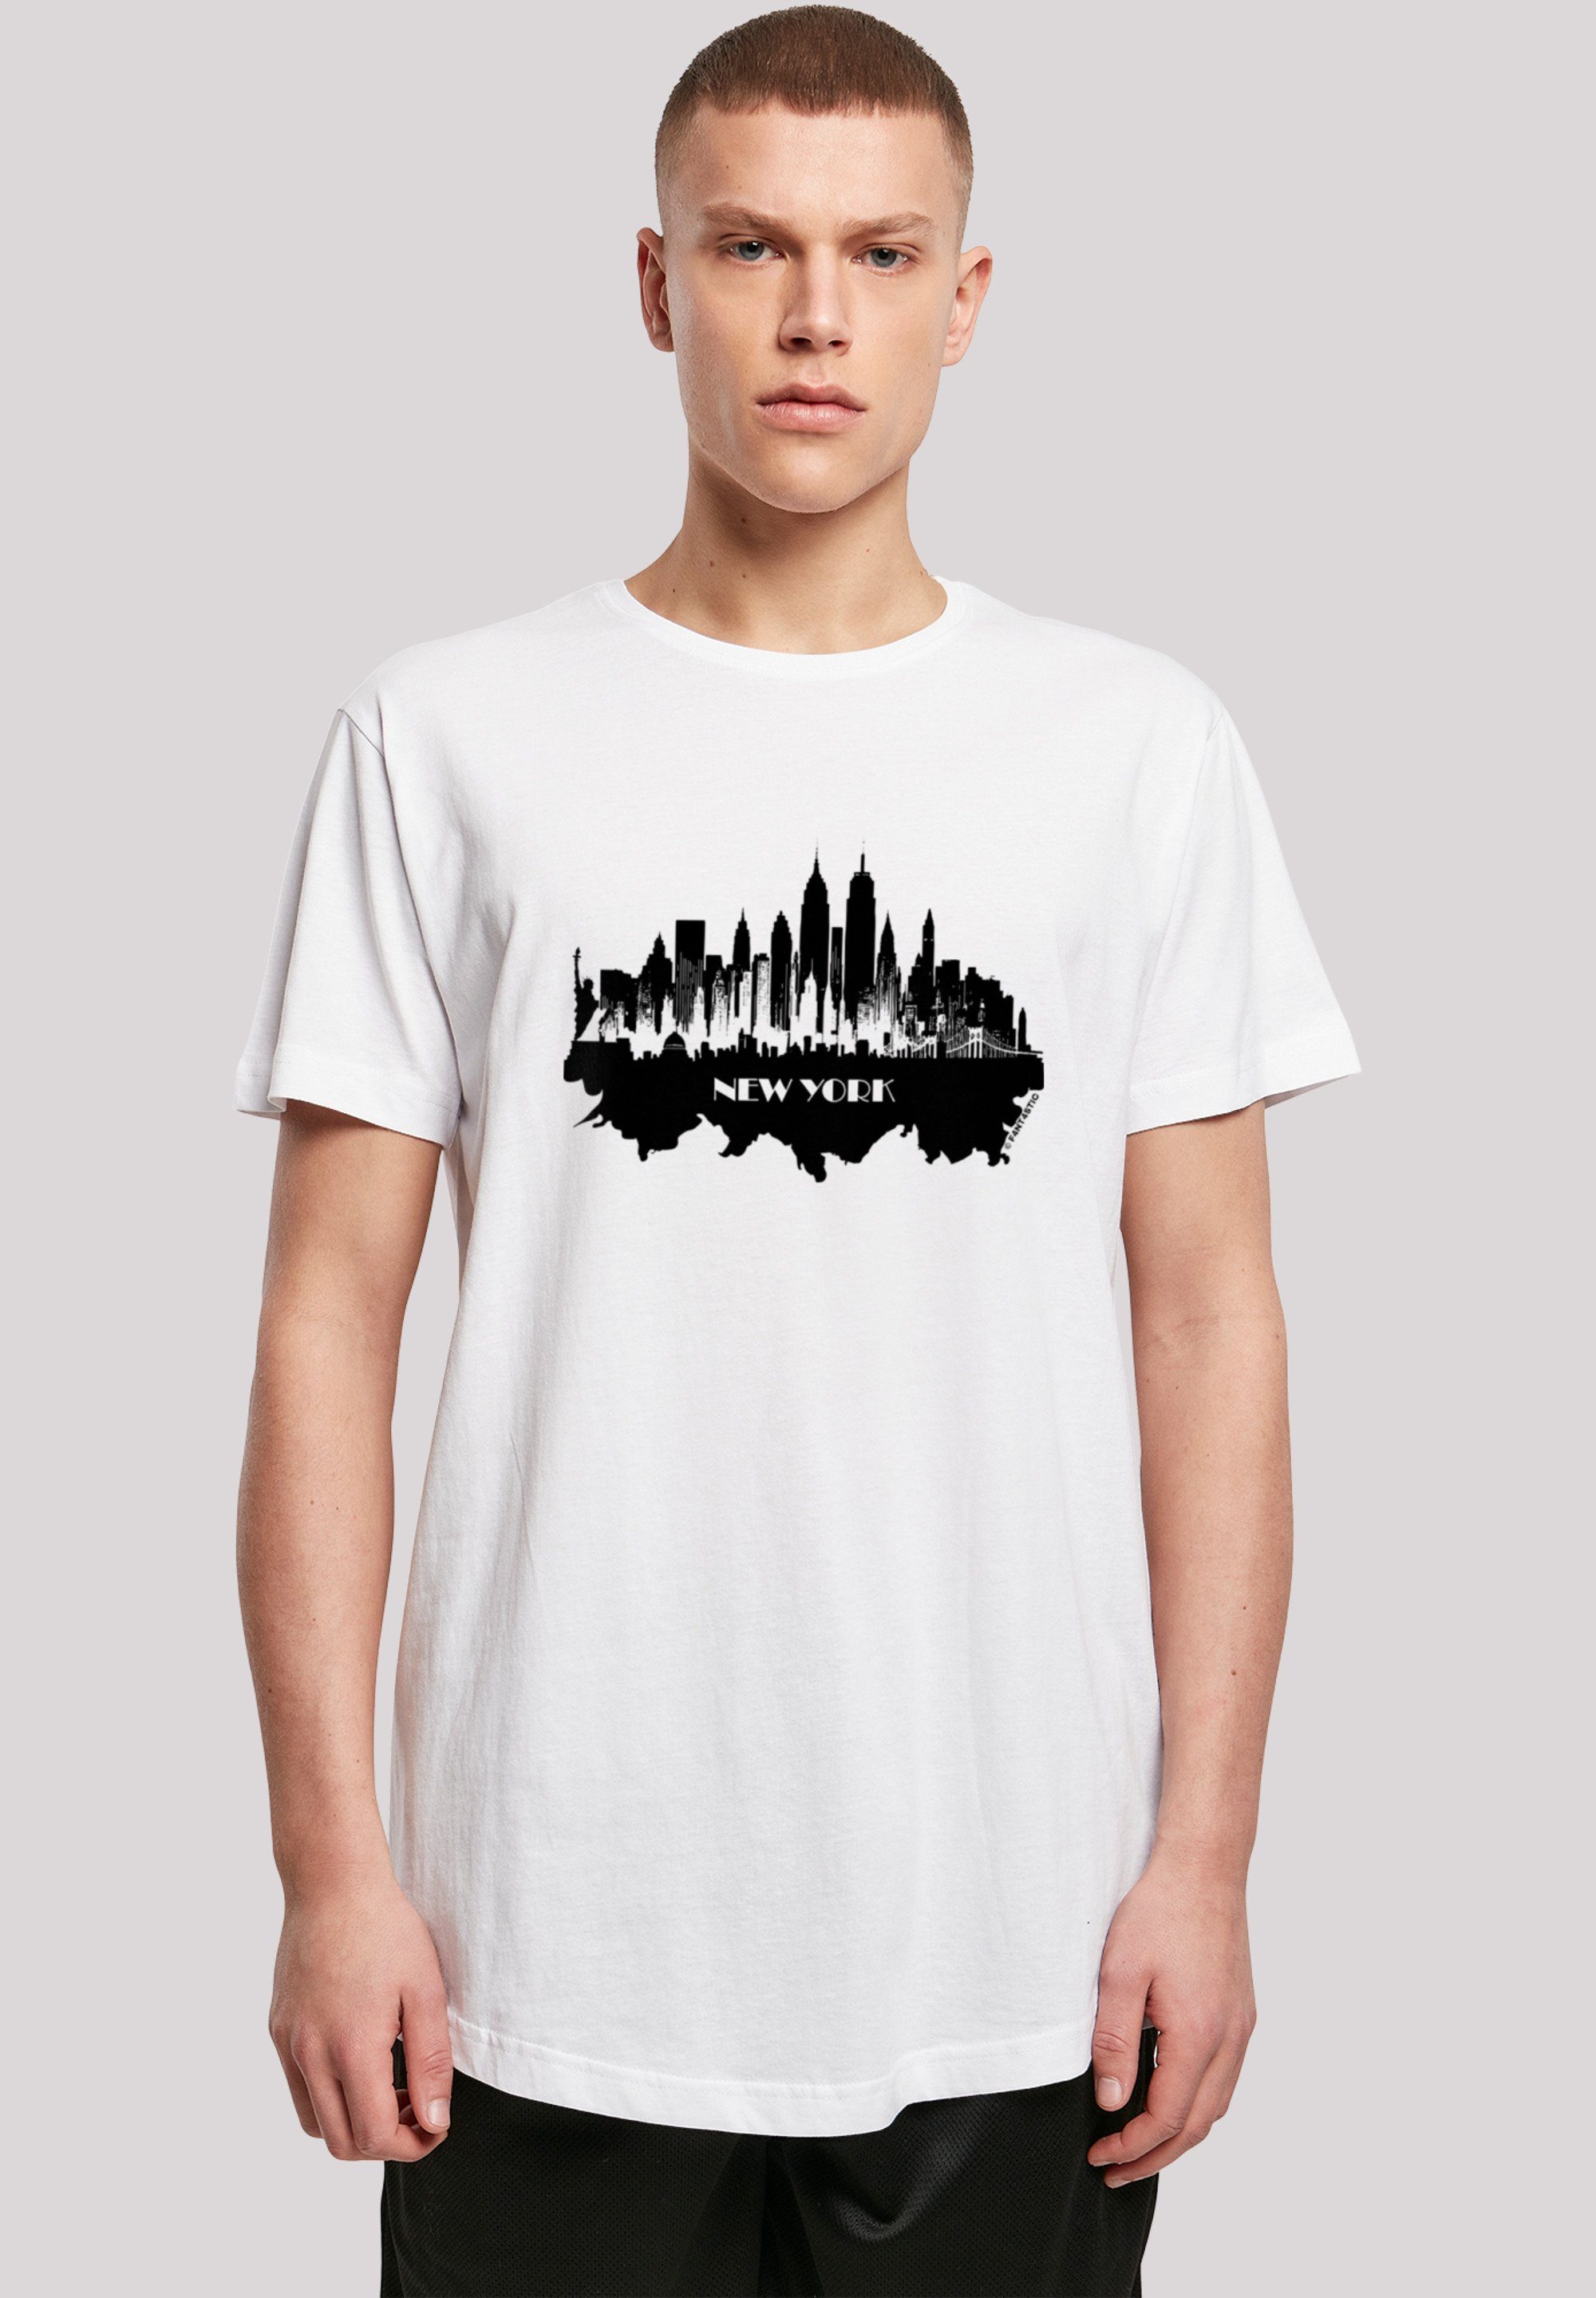 F4NT4STIC T-Shirt Cities Collection - New York skyline Print